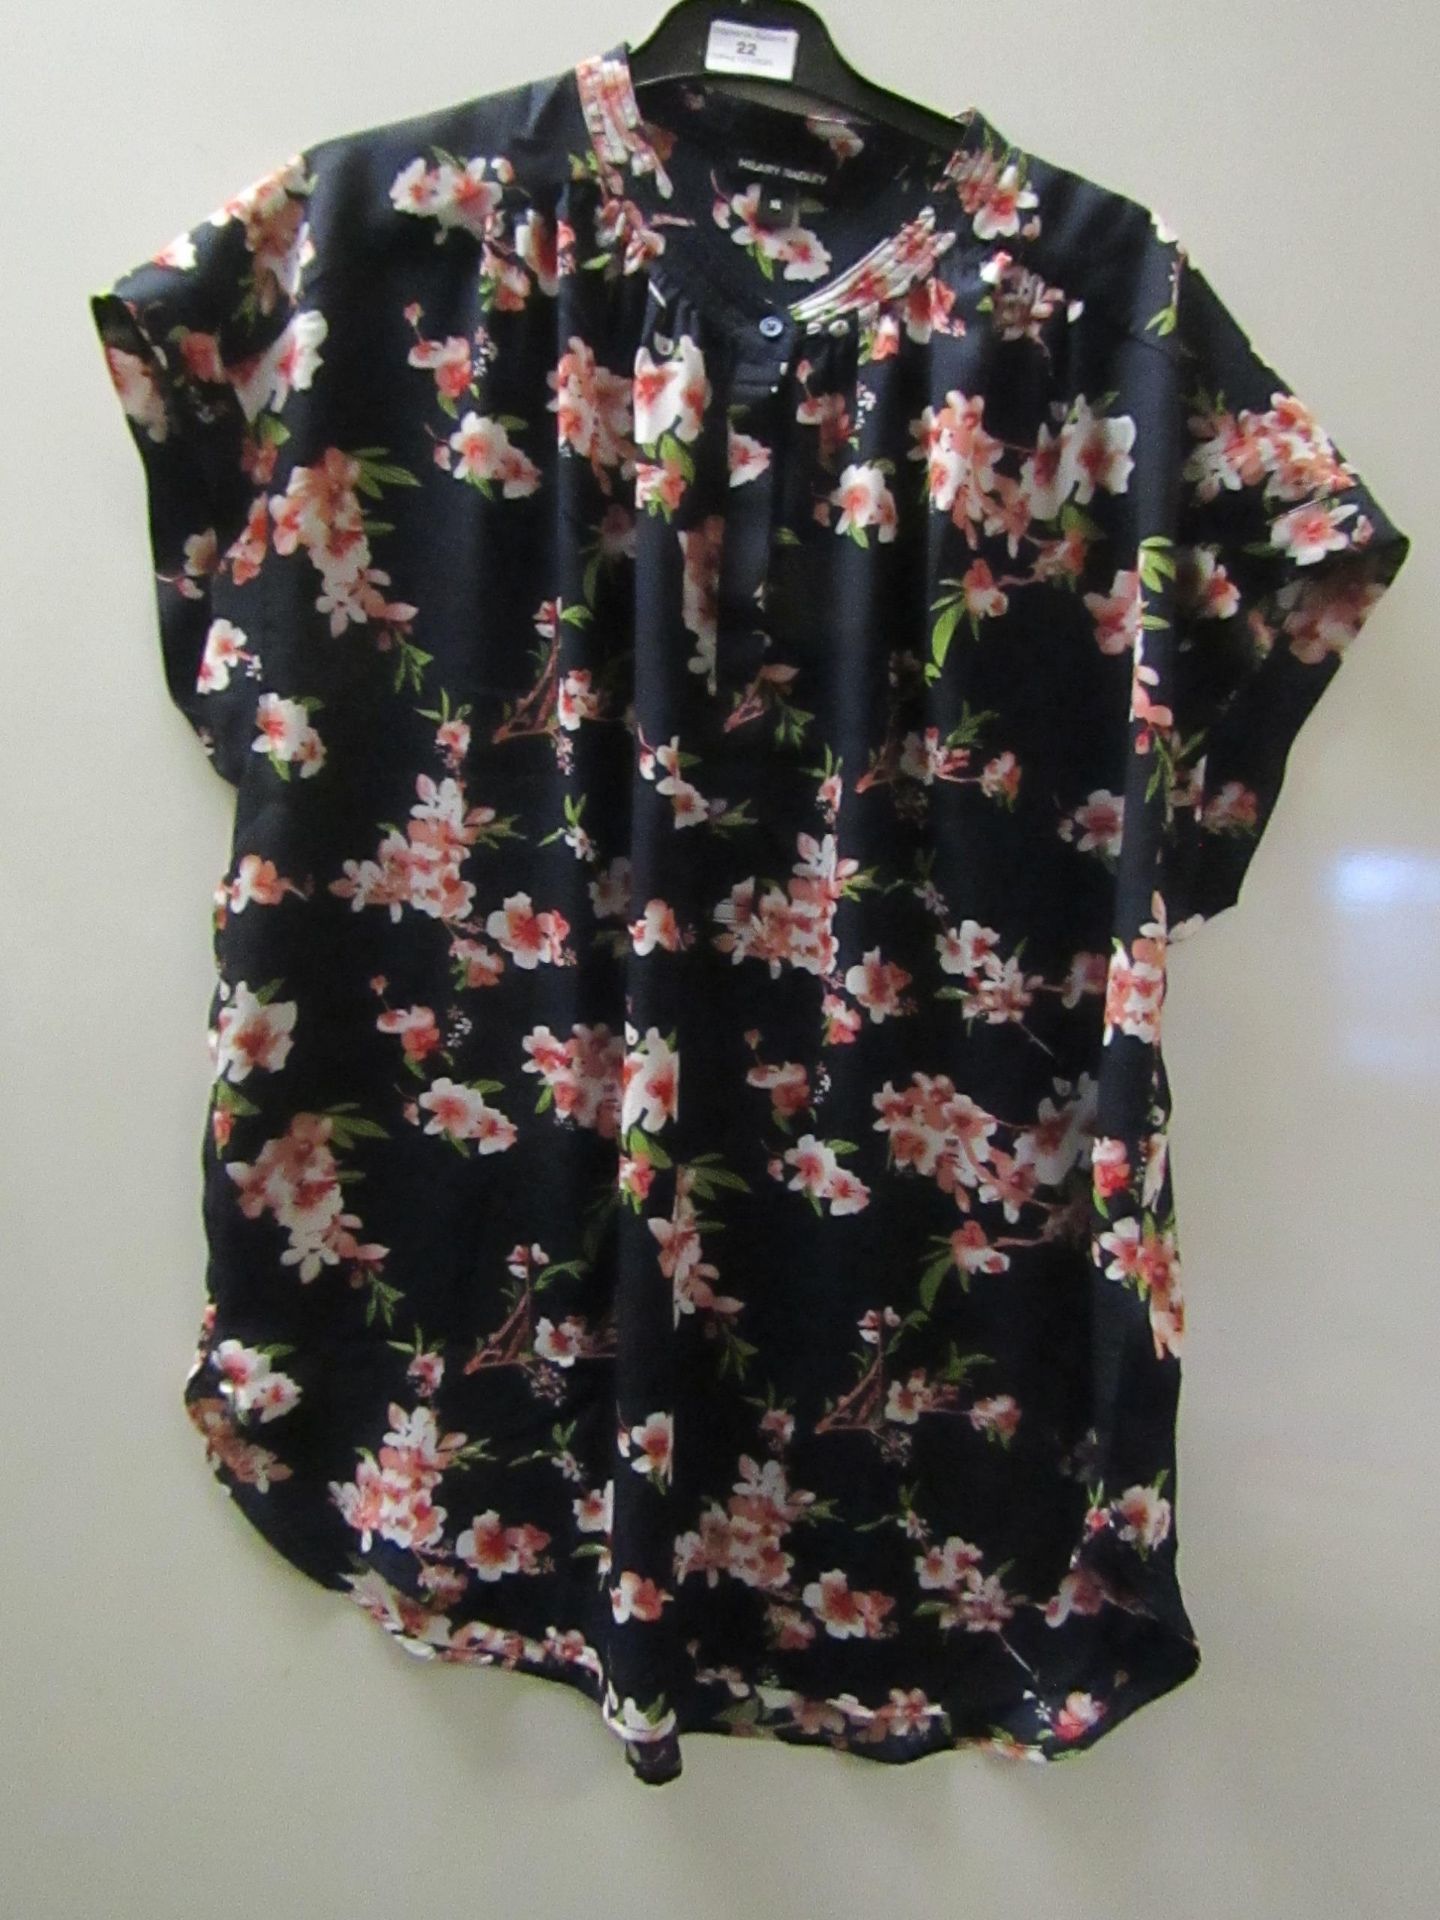 Hilary Radley Blouse Size X/L looks new but has no tags attatched